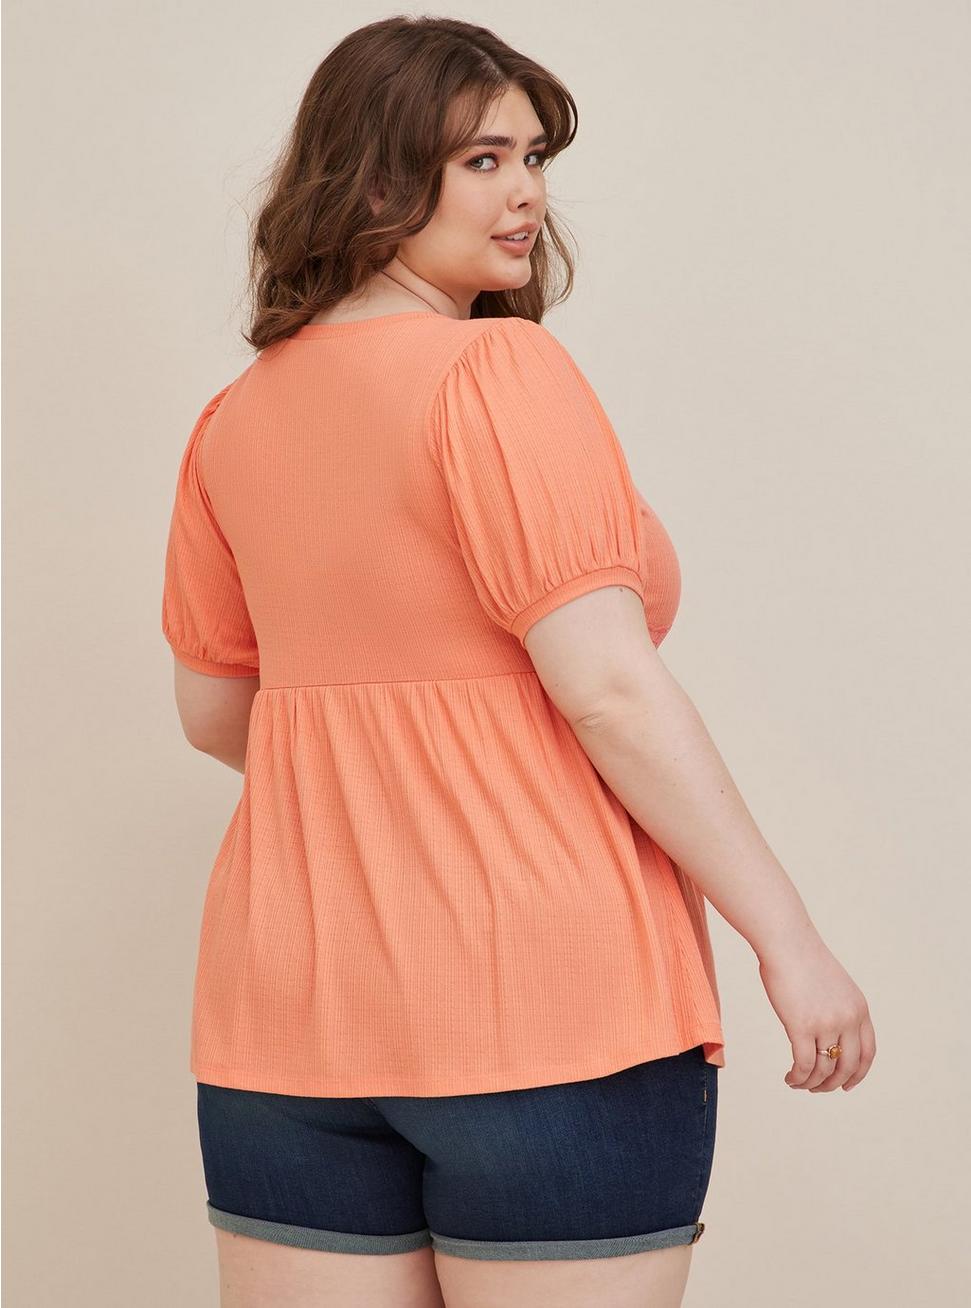 Plus Size Babydoll Textured Knit Strappy Short Sleeve Top, CORAL, alternate